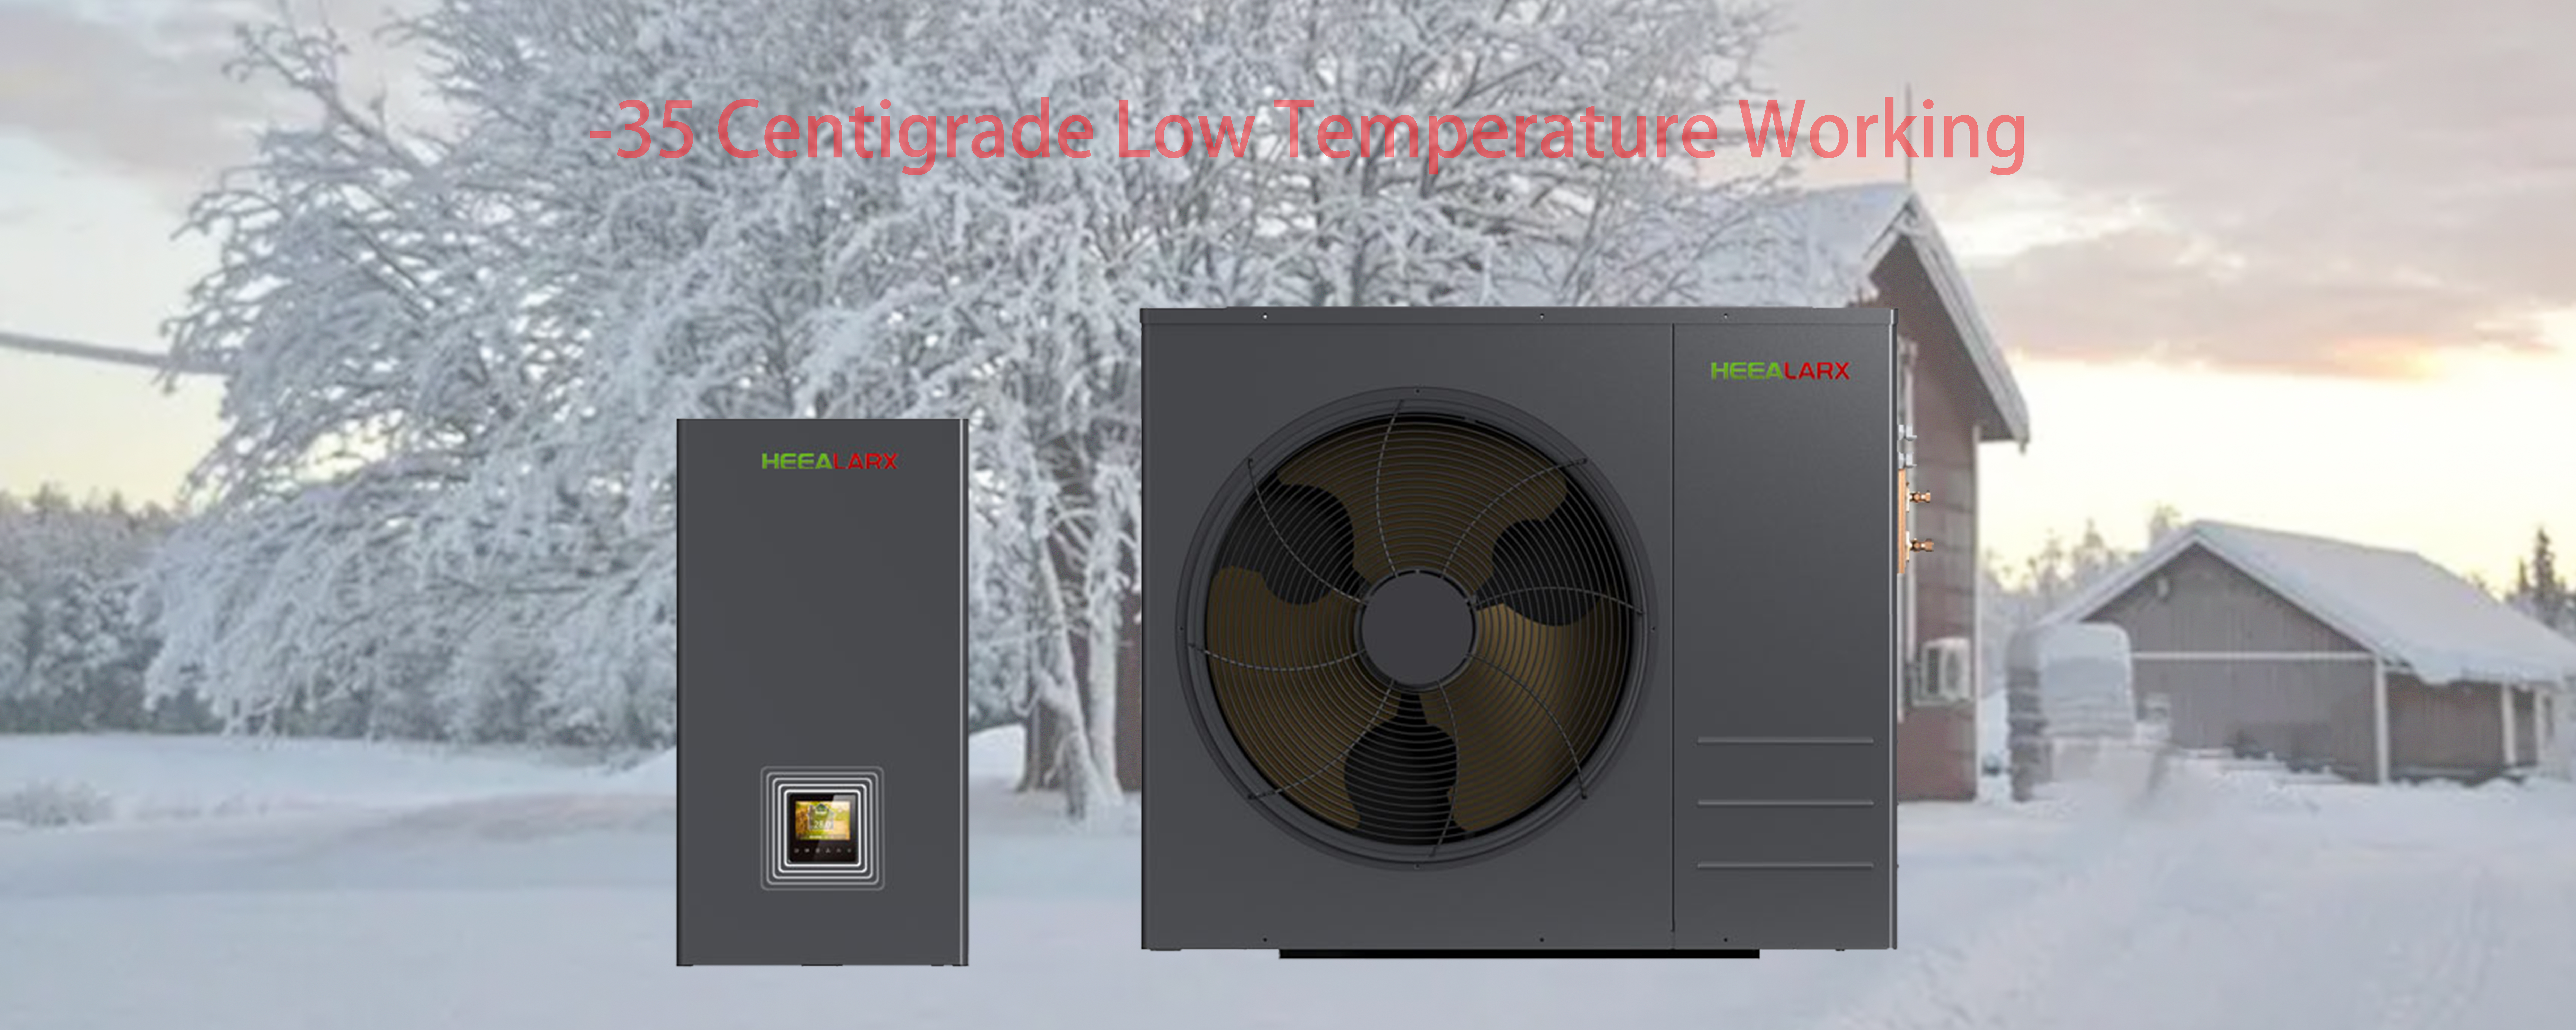 Stable Running at -35℃ Low Ambient Temperature